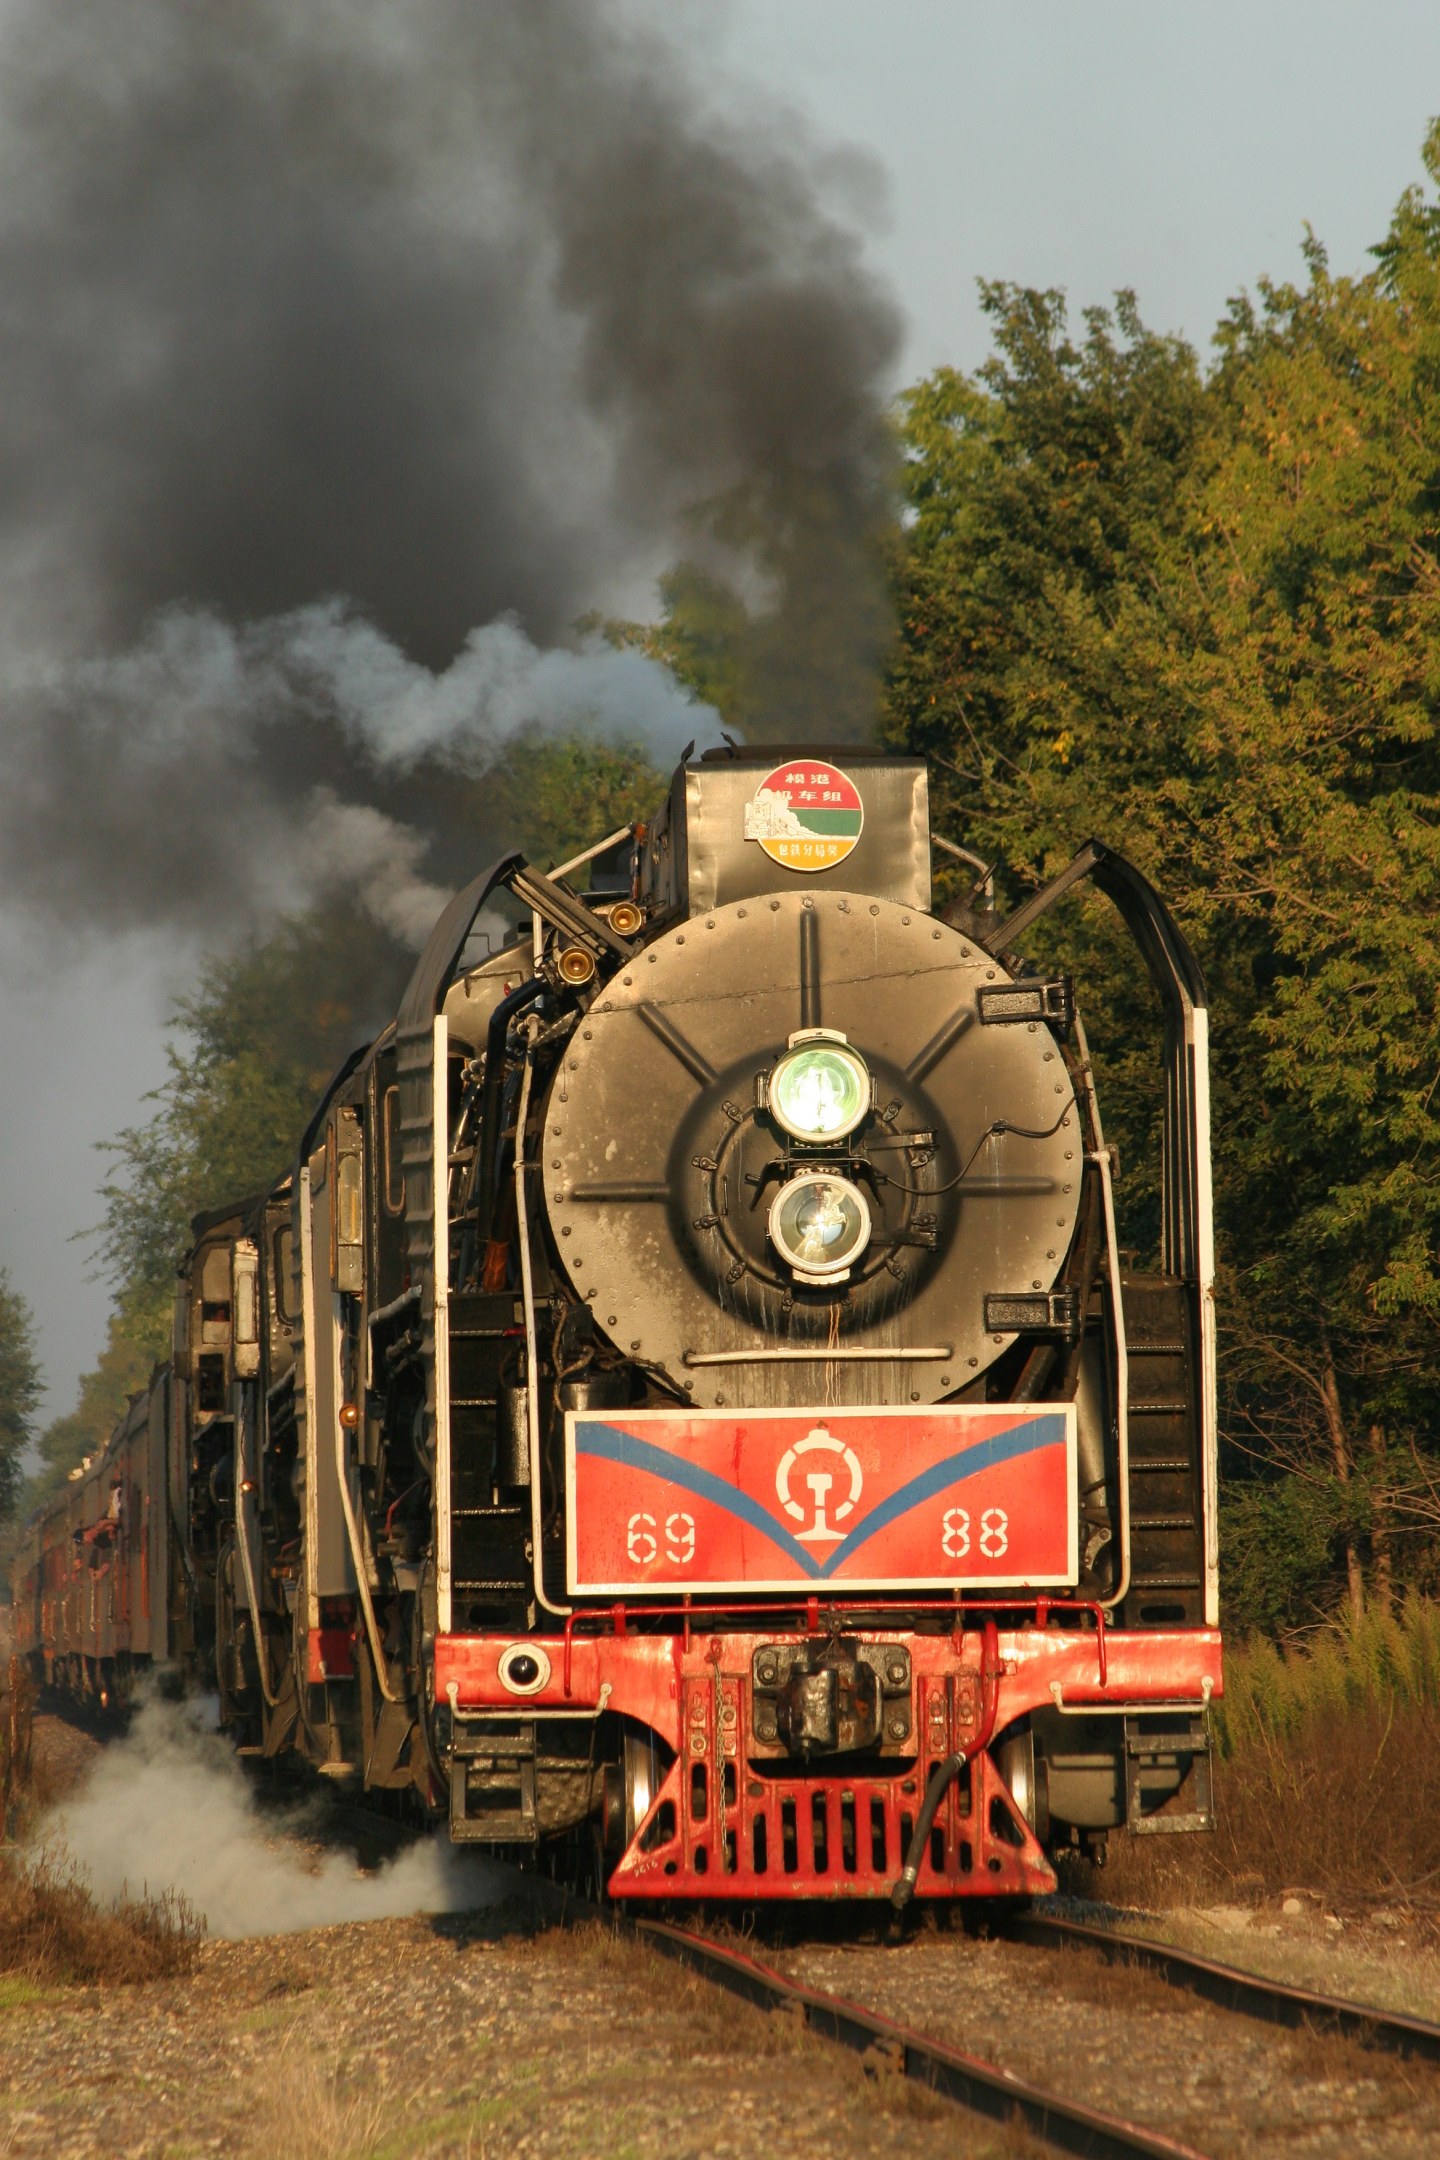 The returning train is approaching downtown Moline in the evening light